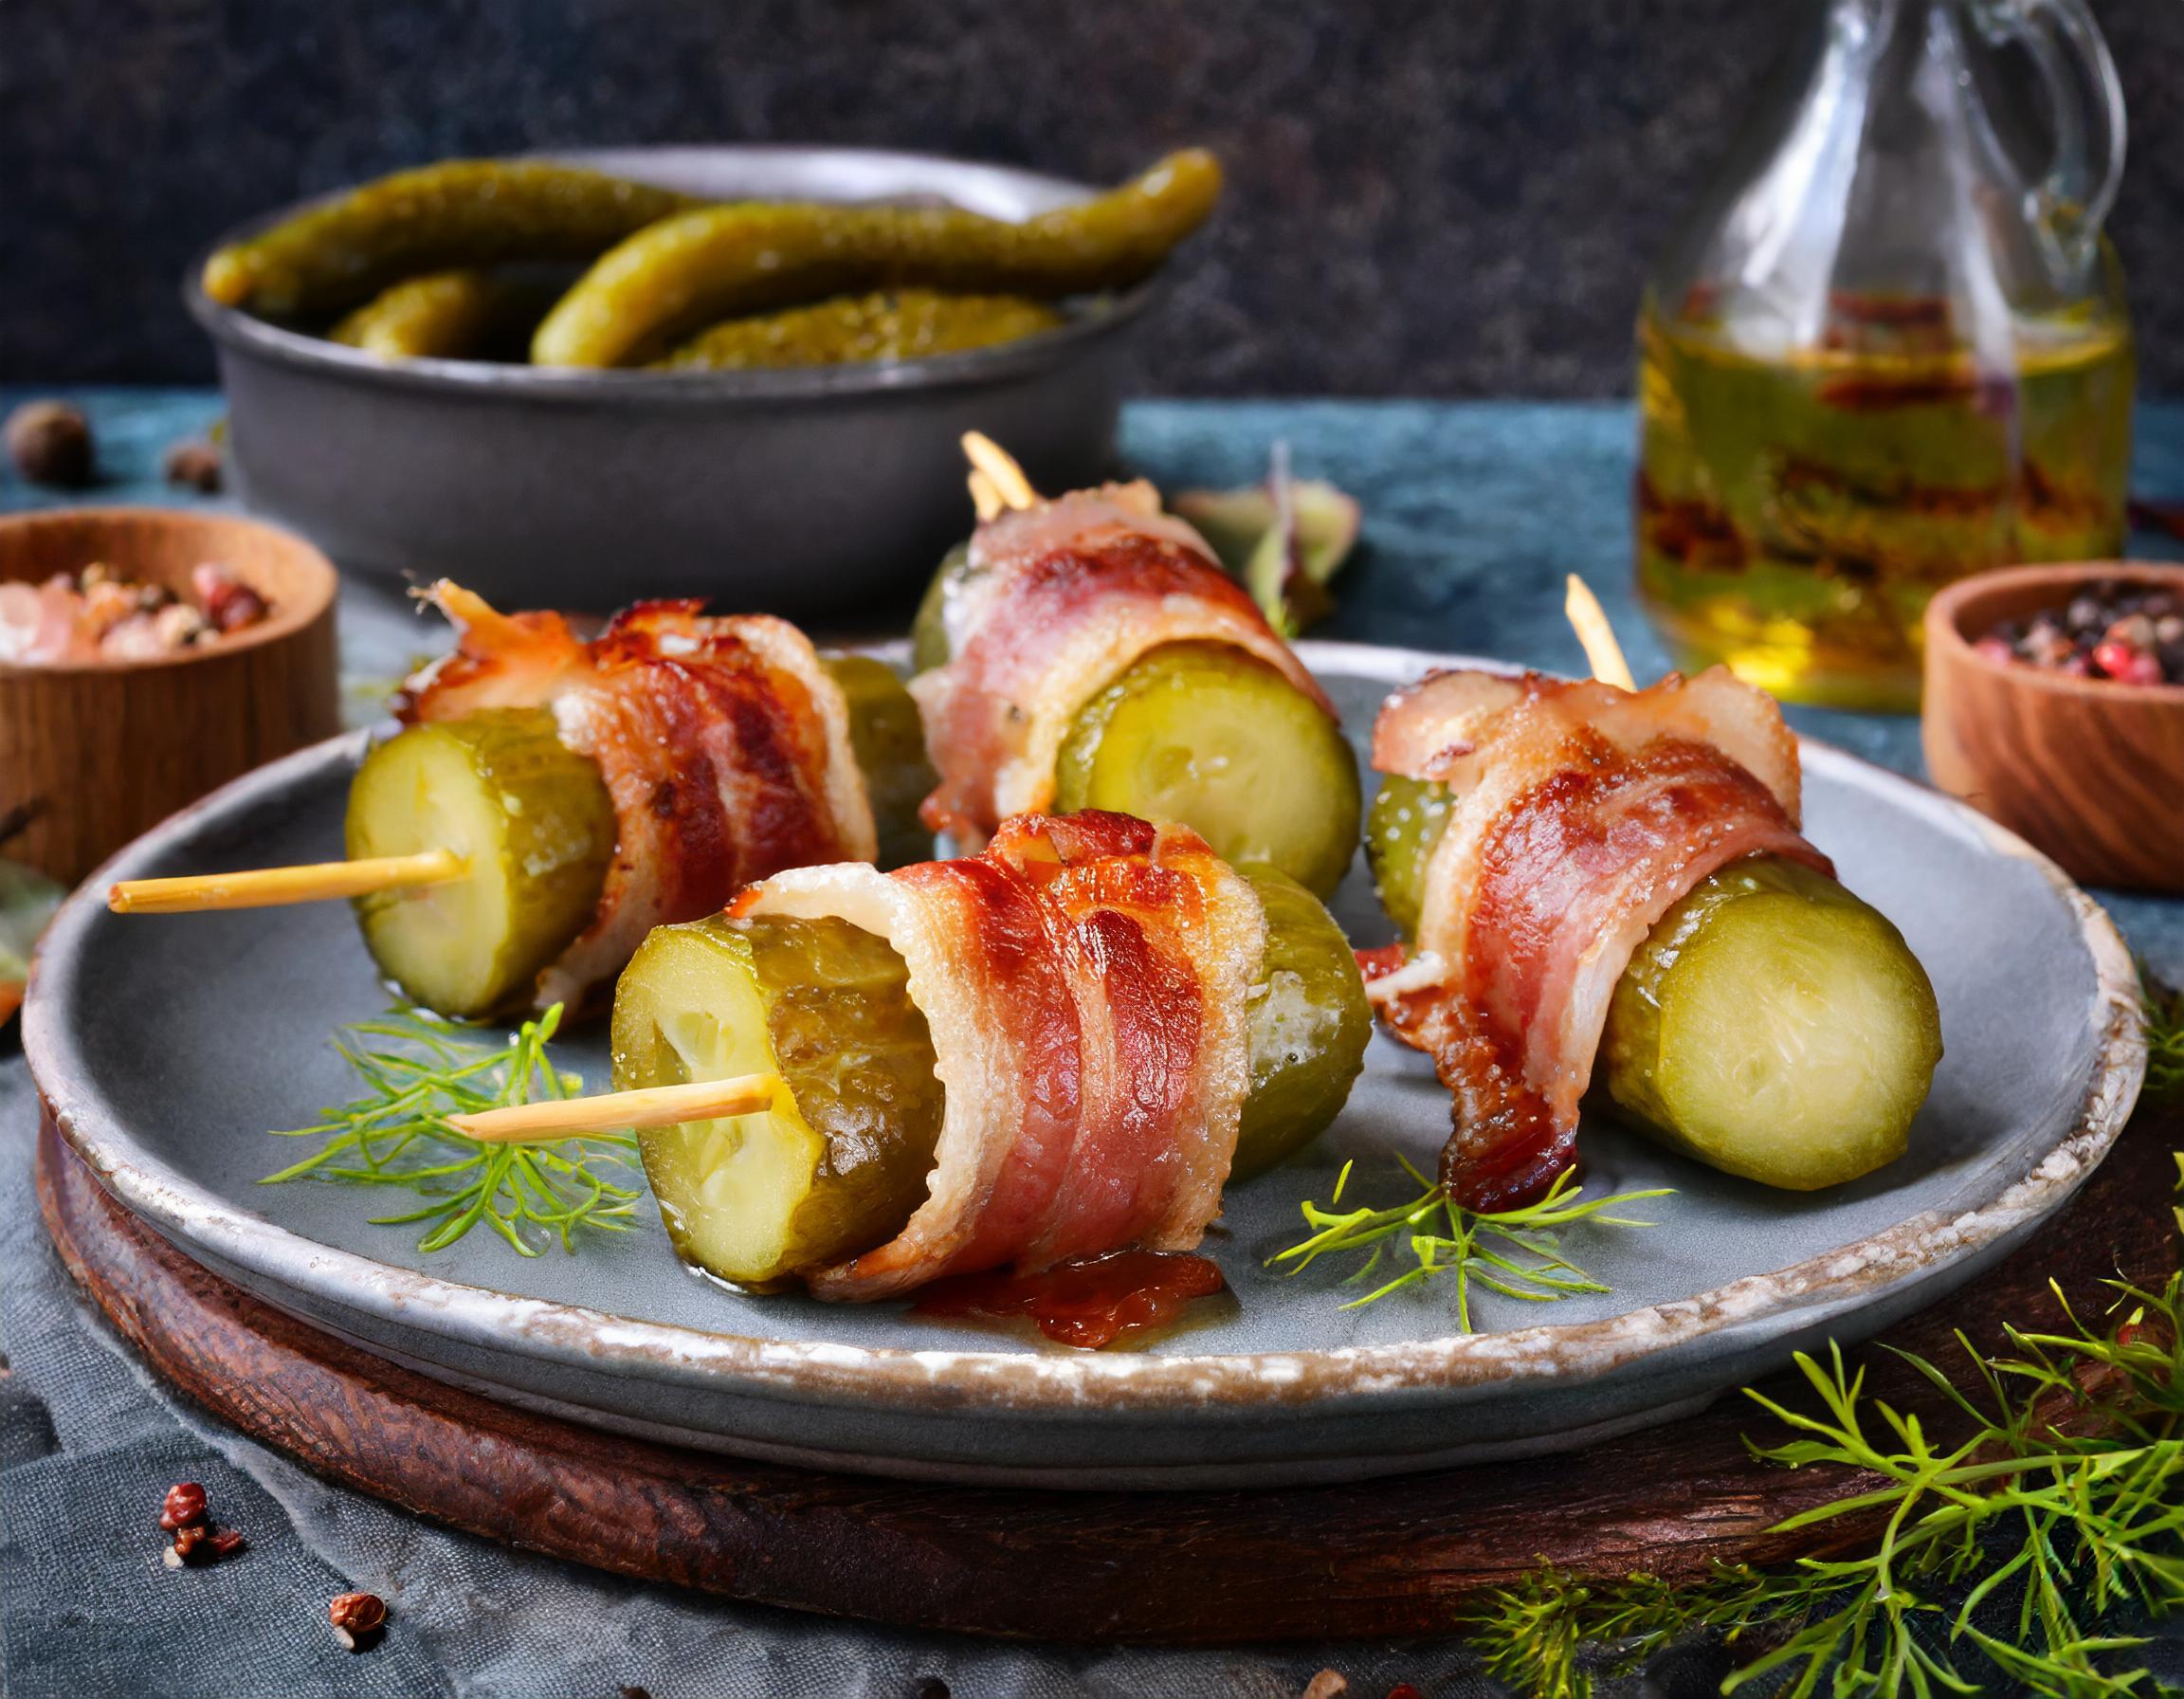 Bacon Wrapped Pickles Are The Hot New Snack Trend You Need to Try